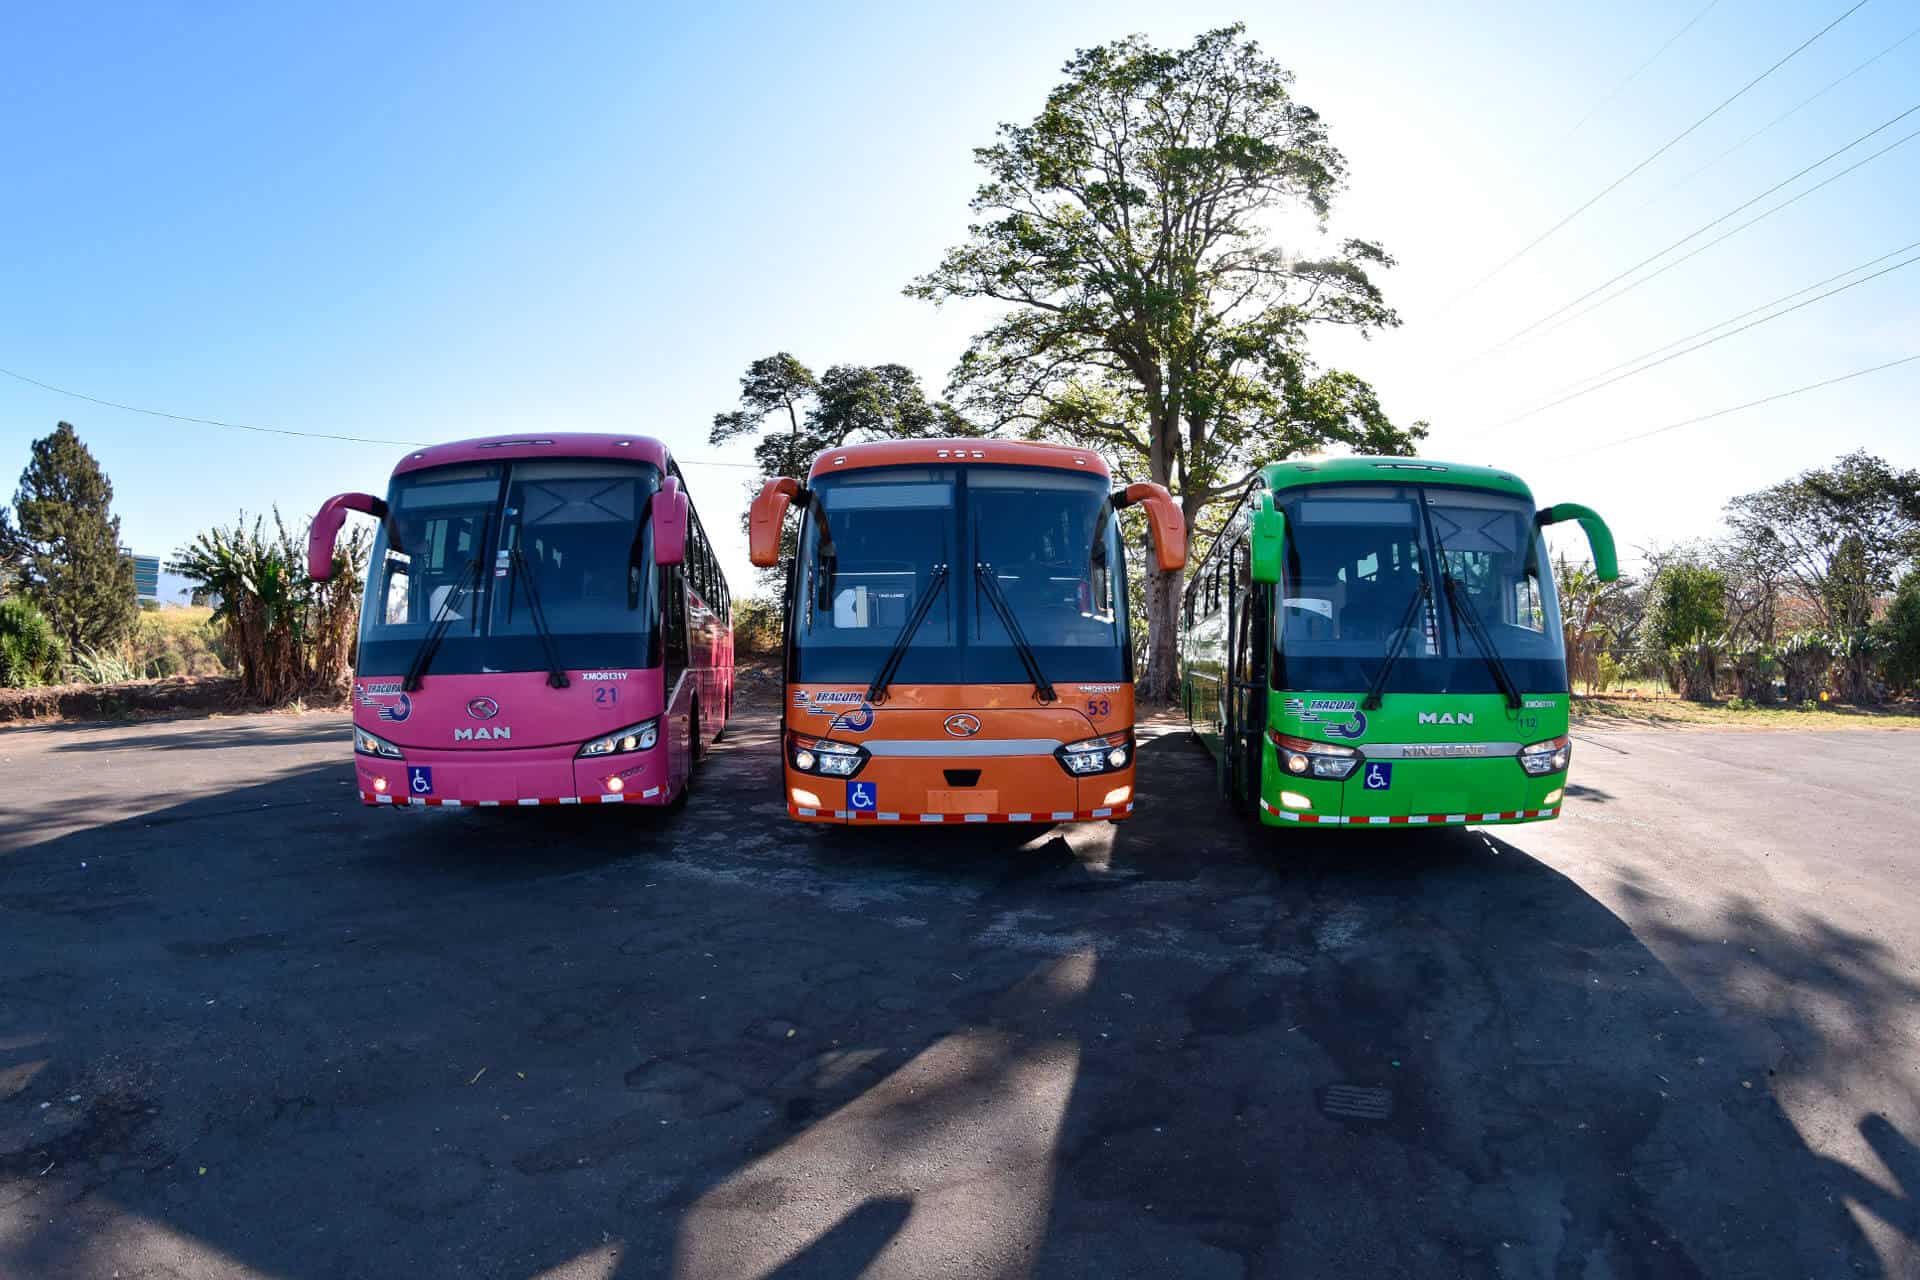 How To Get From Sierpe to Uvita Best Way – All Possible Ways, Sierpe to Uvita, Sierpe to Uvita transfer, cheapest way from Sierpe to Uvita, bus from Sierpe to Uvita, from Sierpe to Uvita by bus, best way from Sierpe to Uvita, taxi from Sierpe to Uvita, private transfer from Sierpe to Uvita, Shared Van from Sierpe to Uvita, rent a car in Sierpe, uber from Sierpe to Uvita